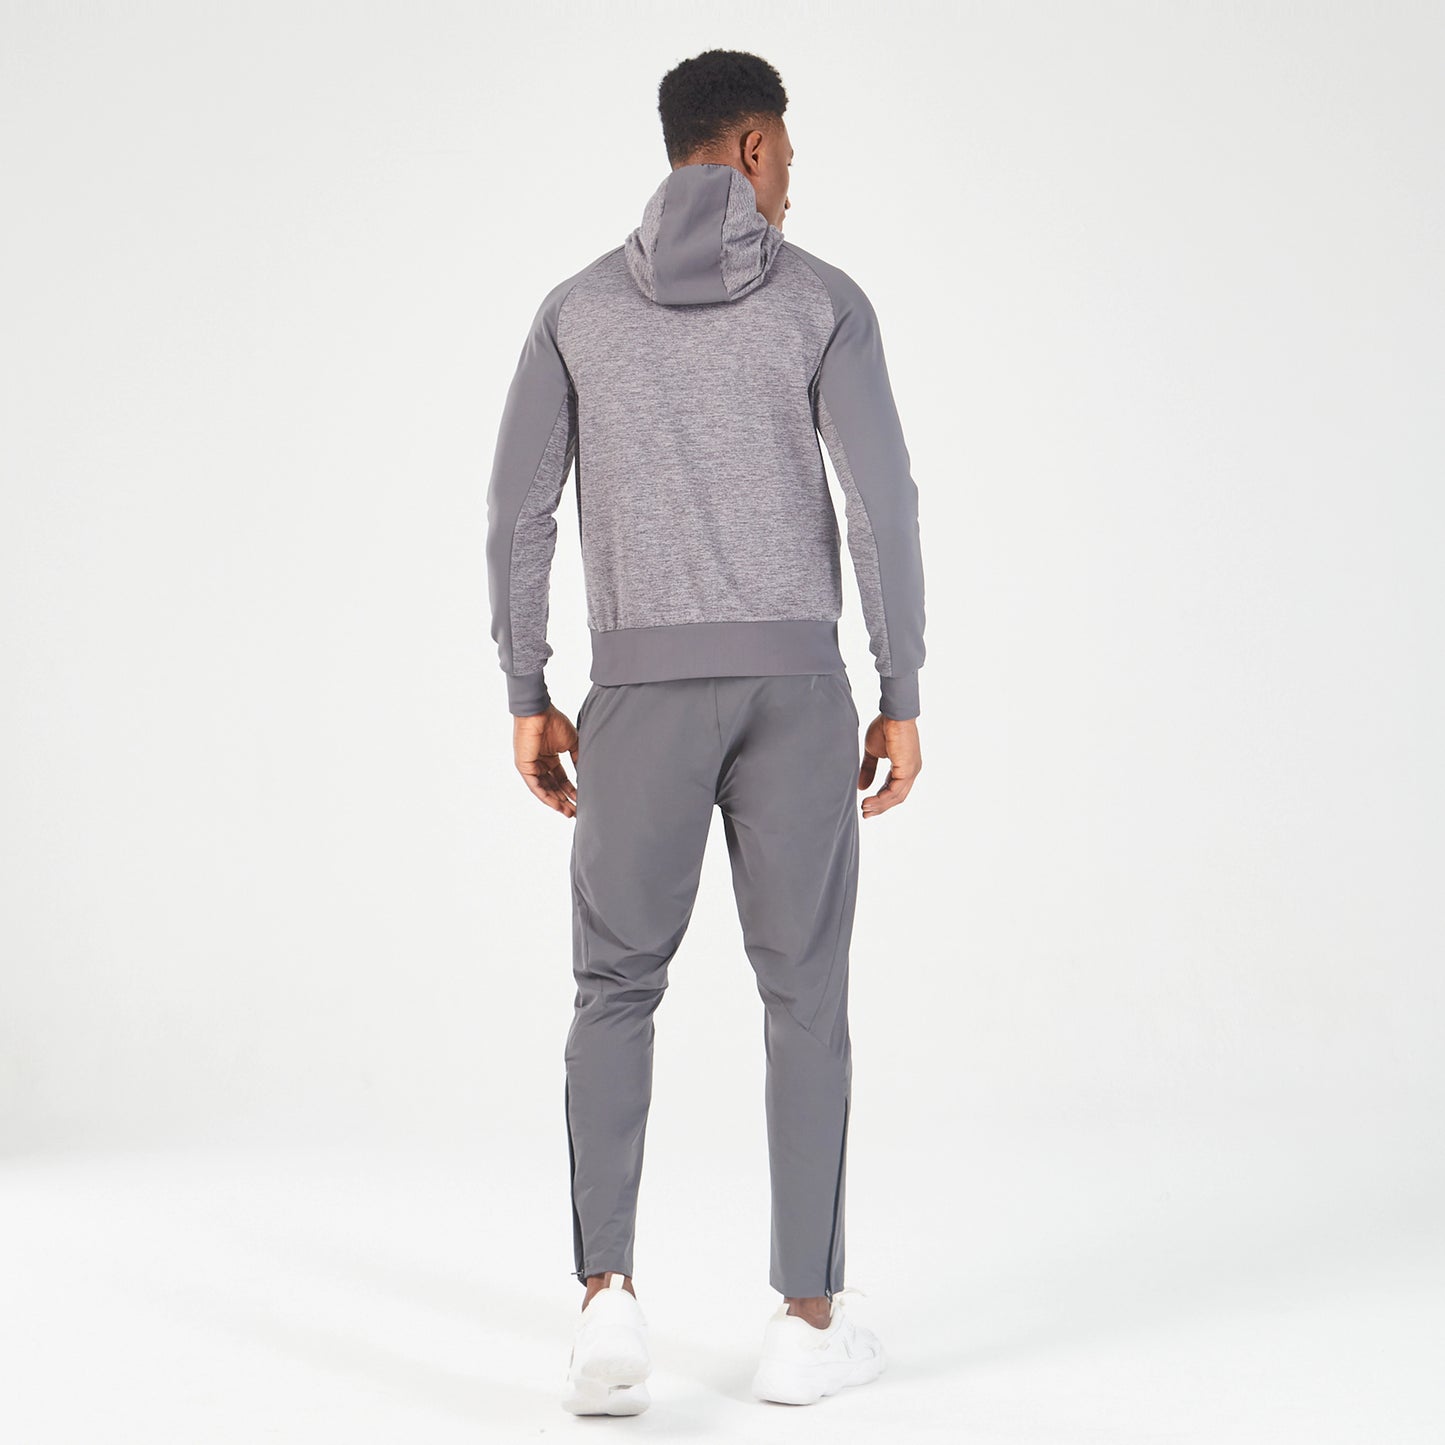 squatwolf-gym-wear-statement-ribbed-hoodie-grey-marl-workout-hoodies-for-men